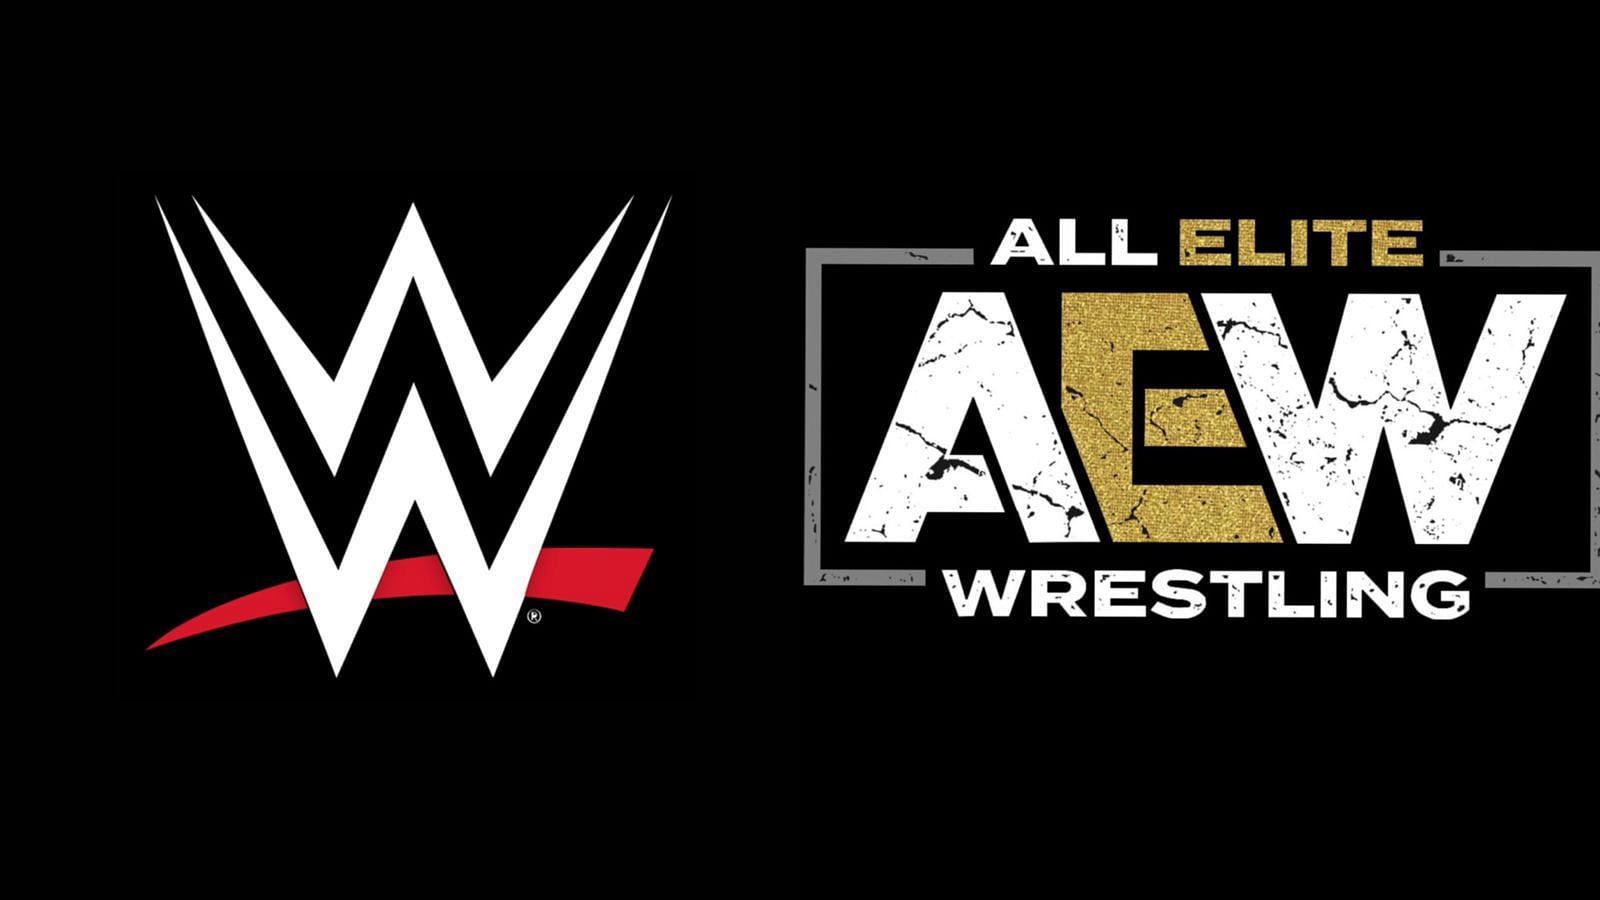 Former WWE star bashes AEW and says they will loose fans